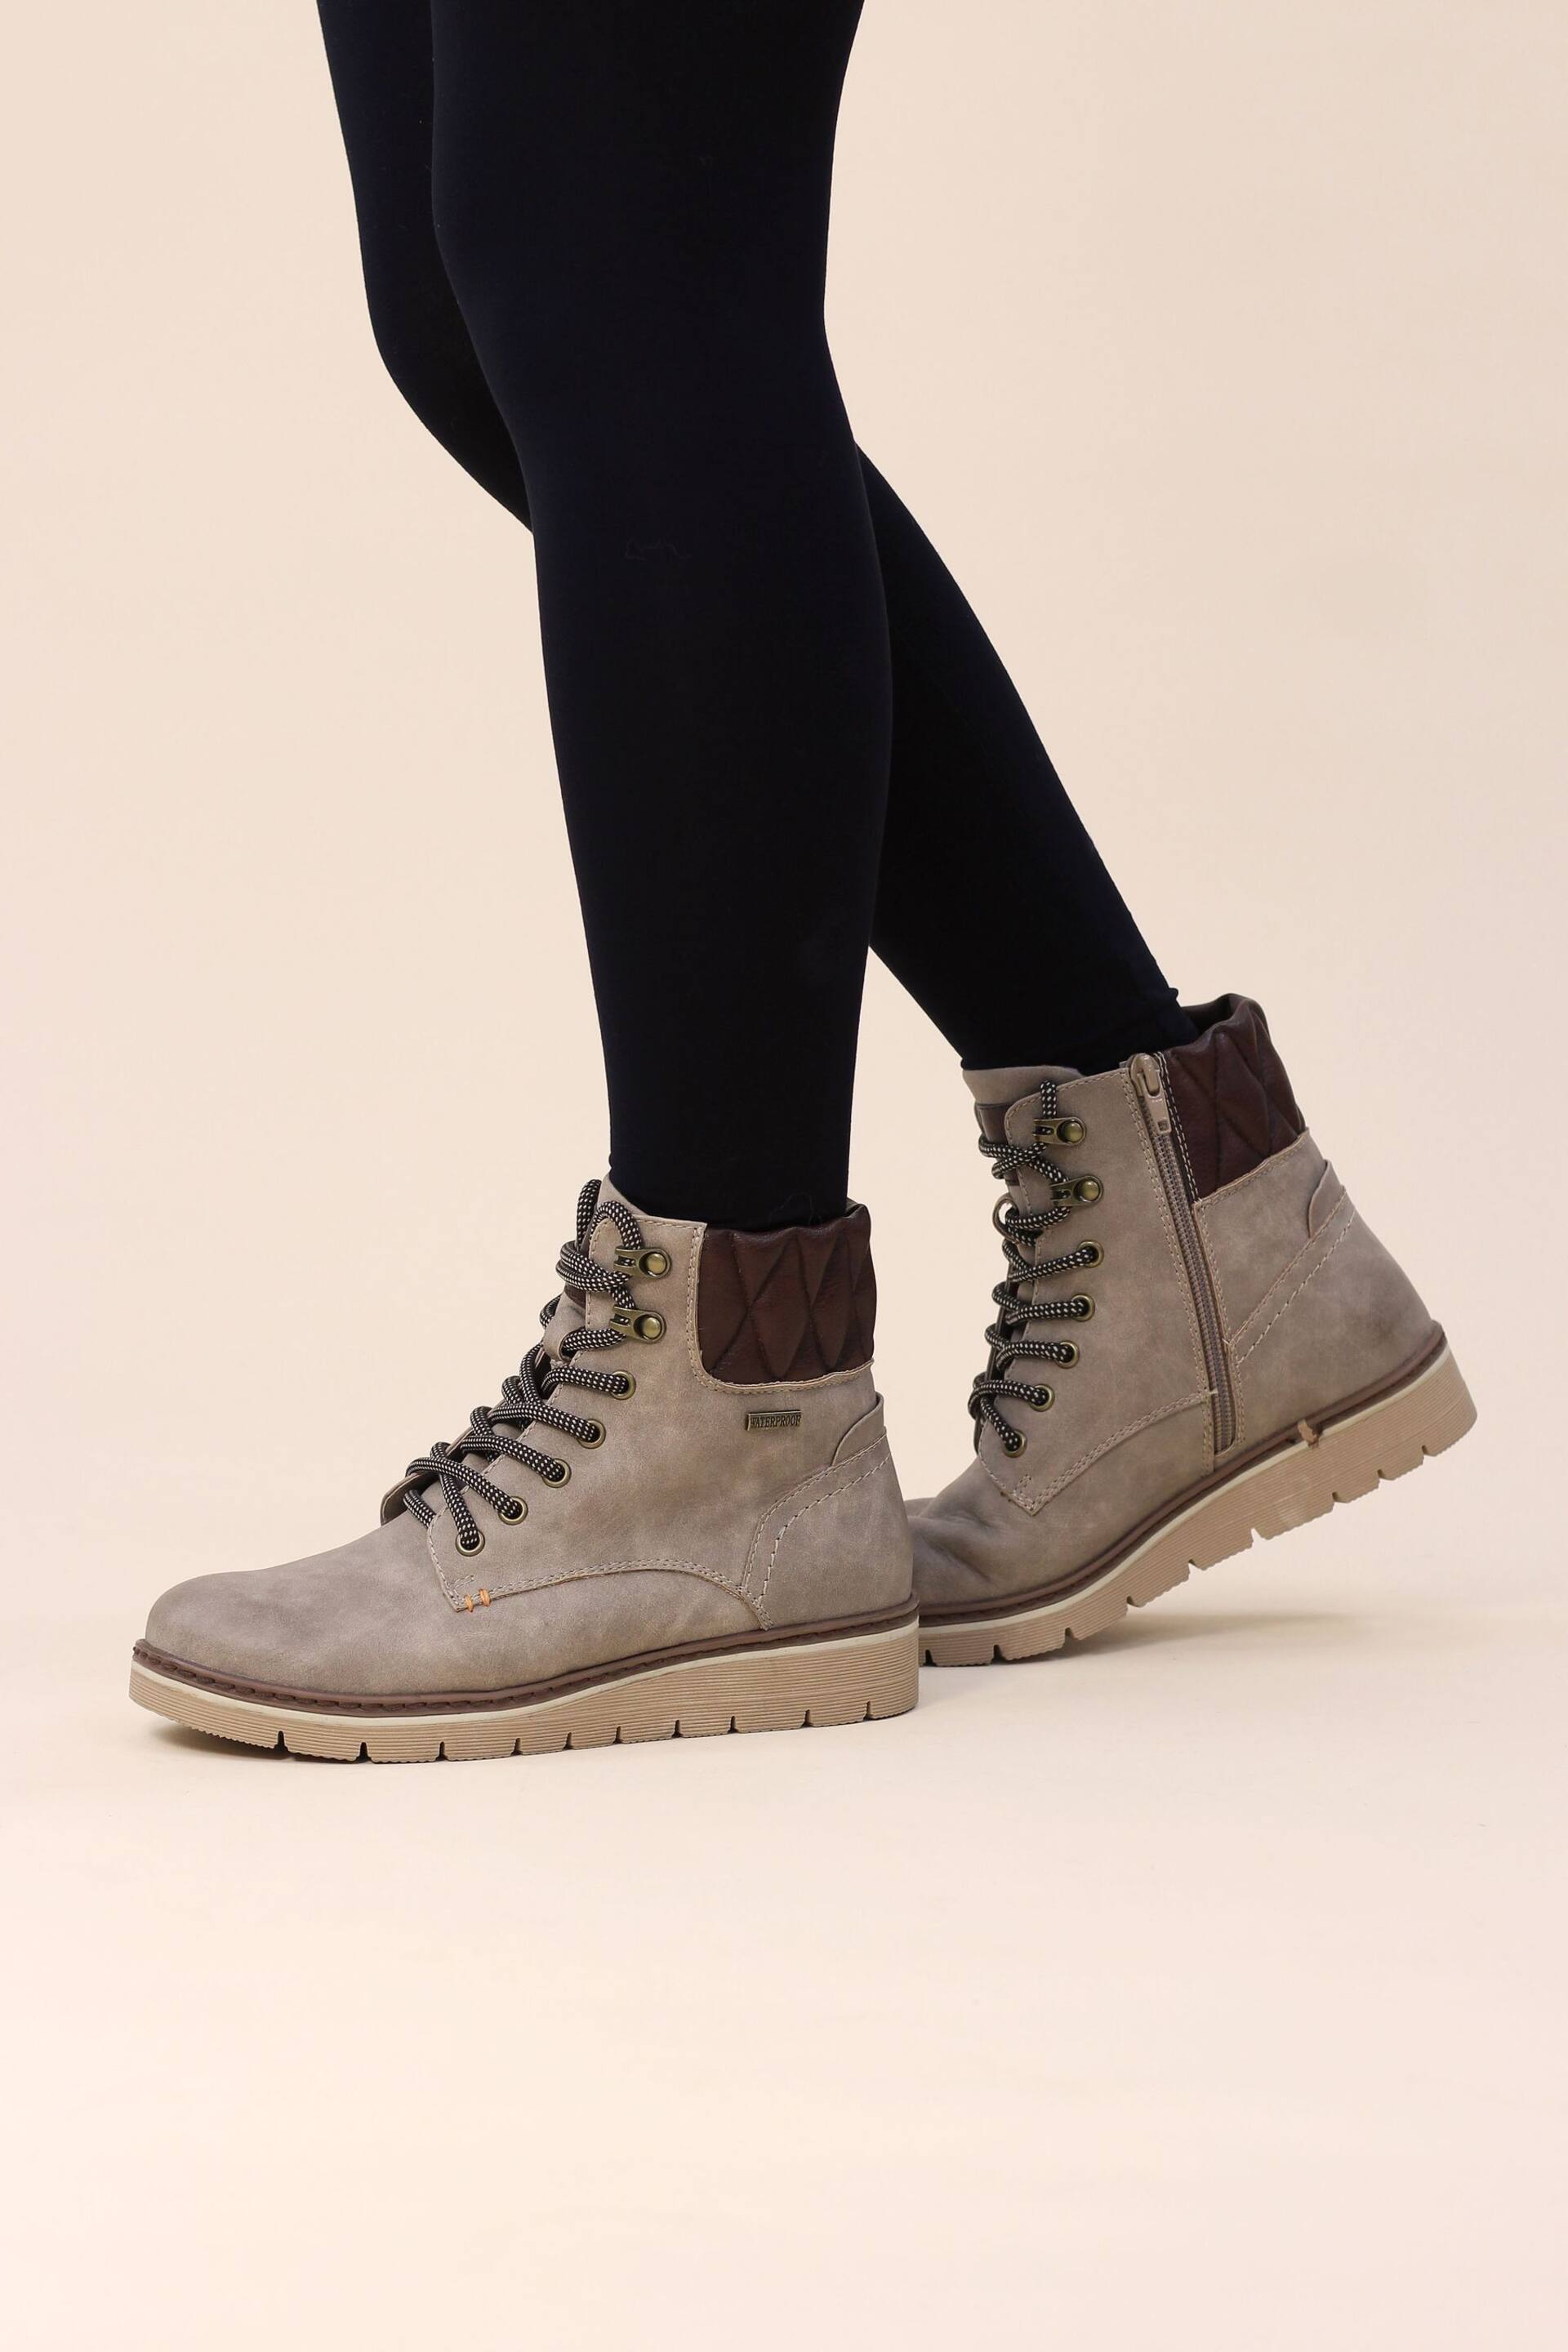 Lunar Natural Roberta Stone Waterproof Ankle Boots - Image 1 of 8